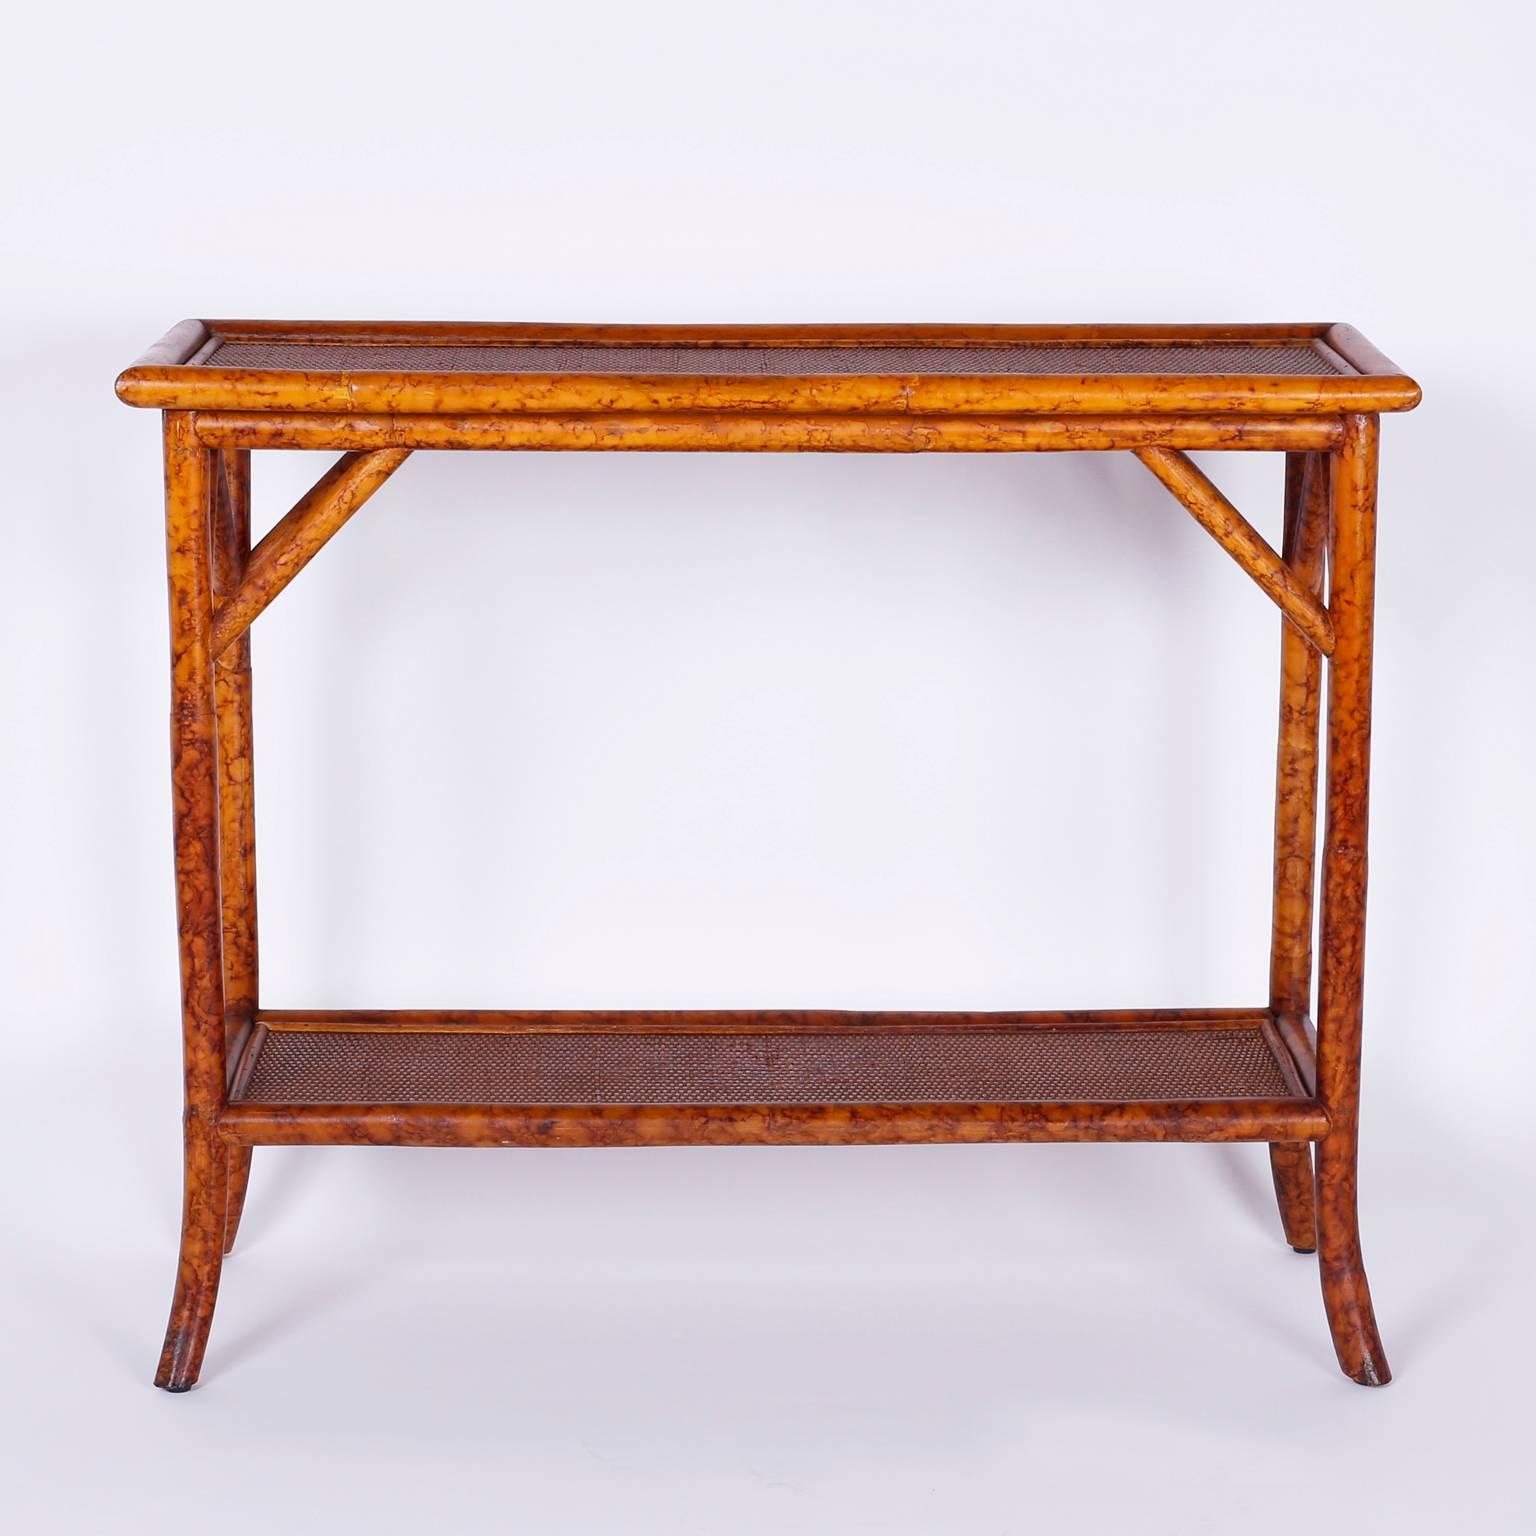 Faux bamboo and tortoiseshell console table, with a simple Asian modern form and two tiers with grass cloth surfaces.